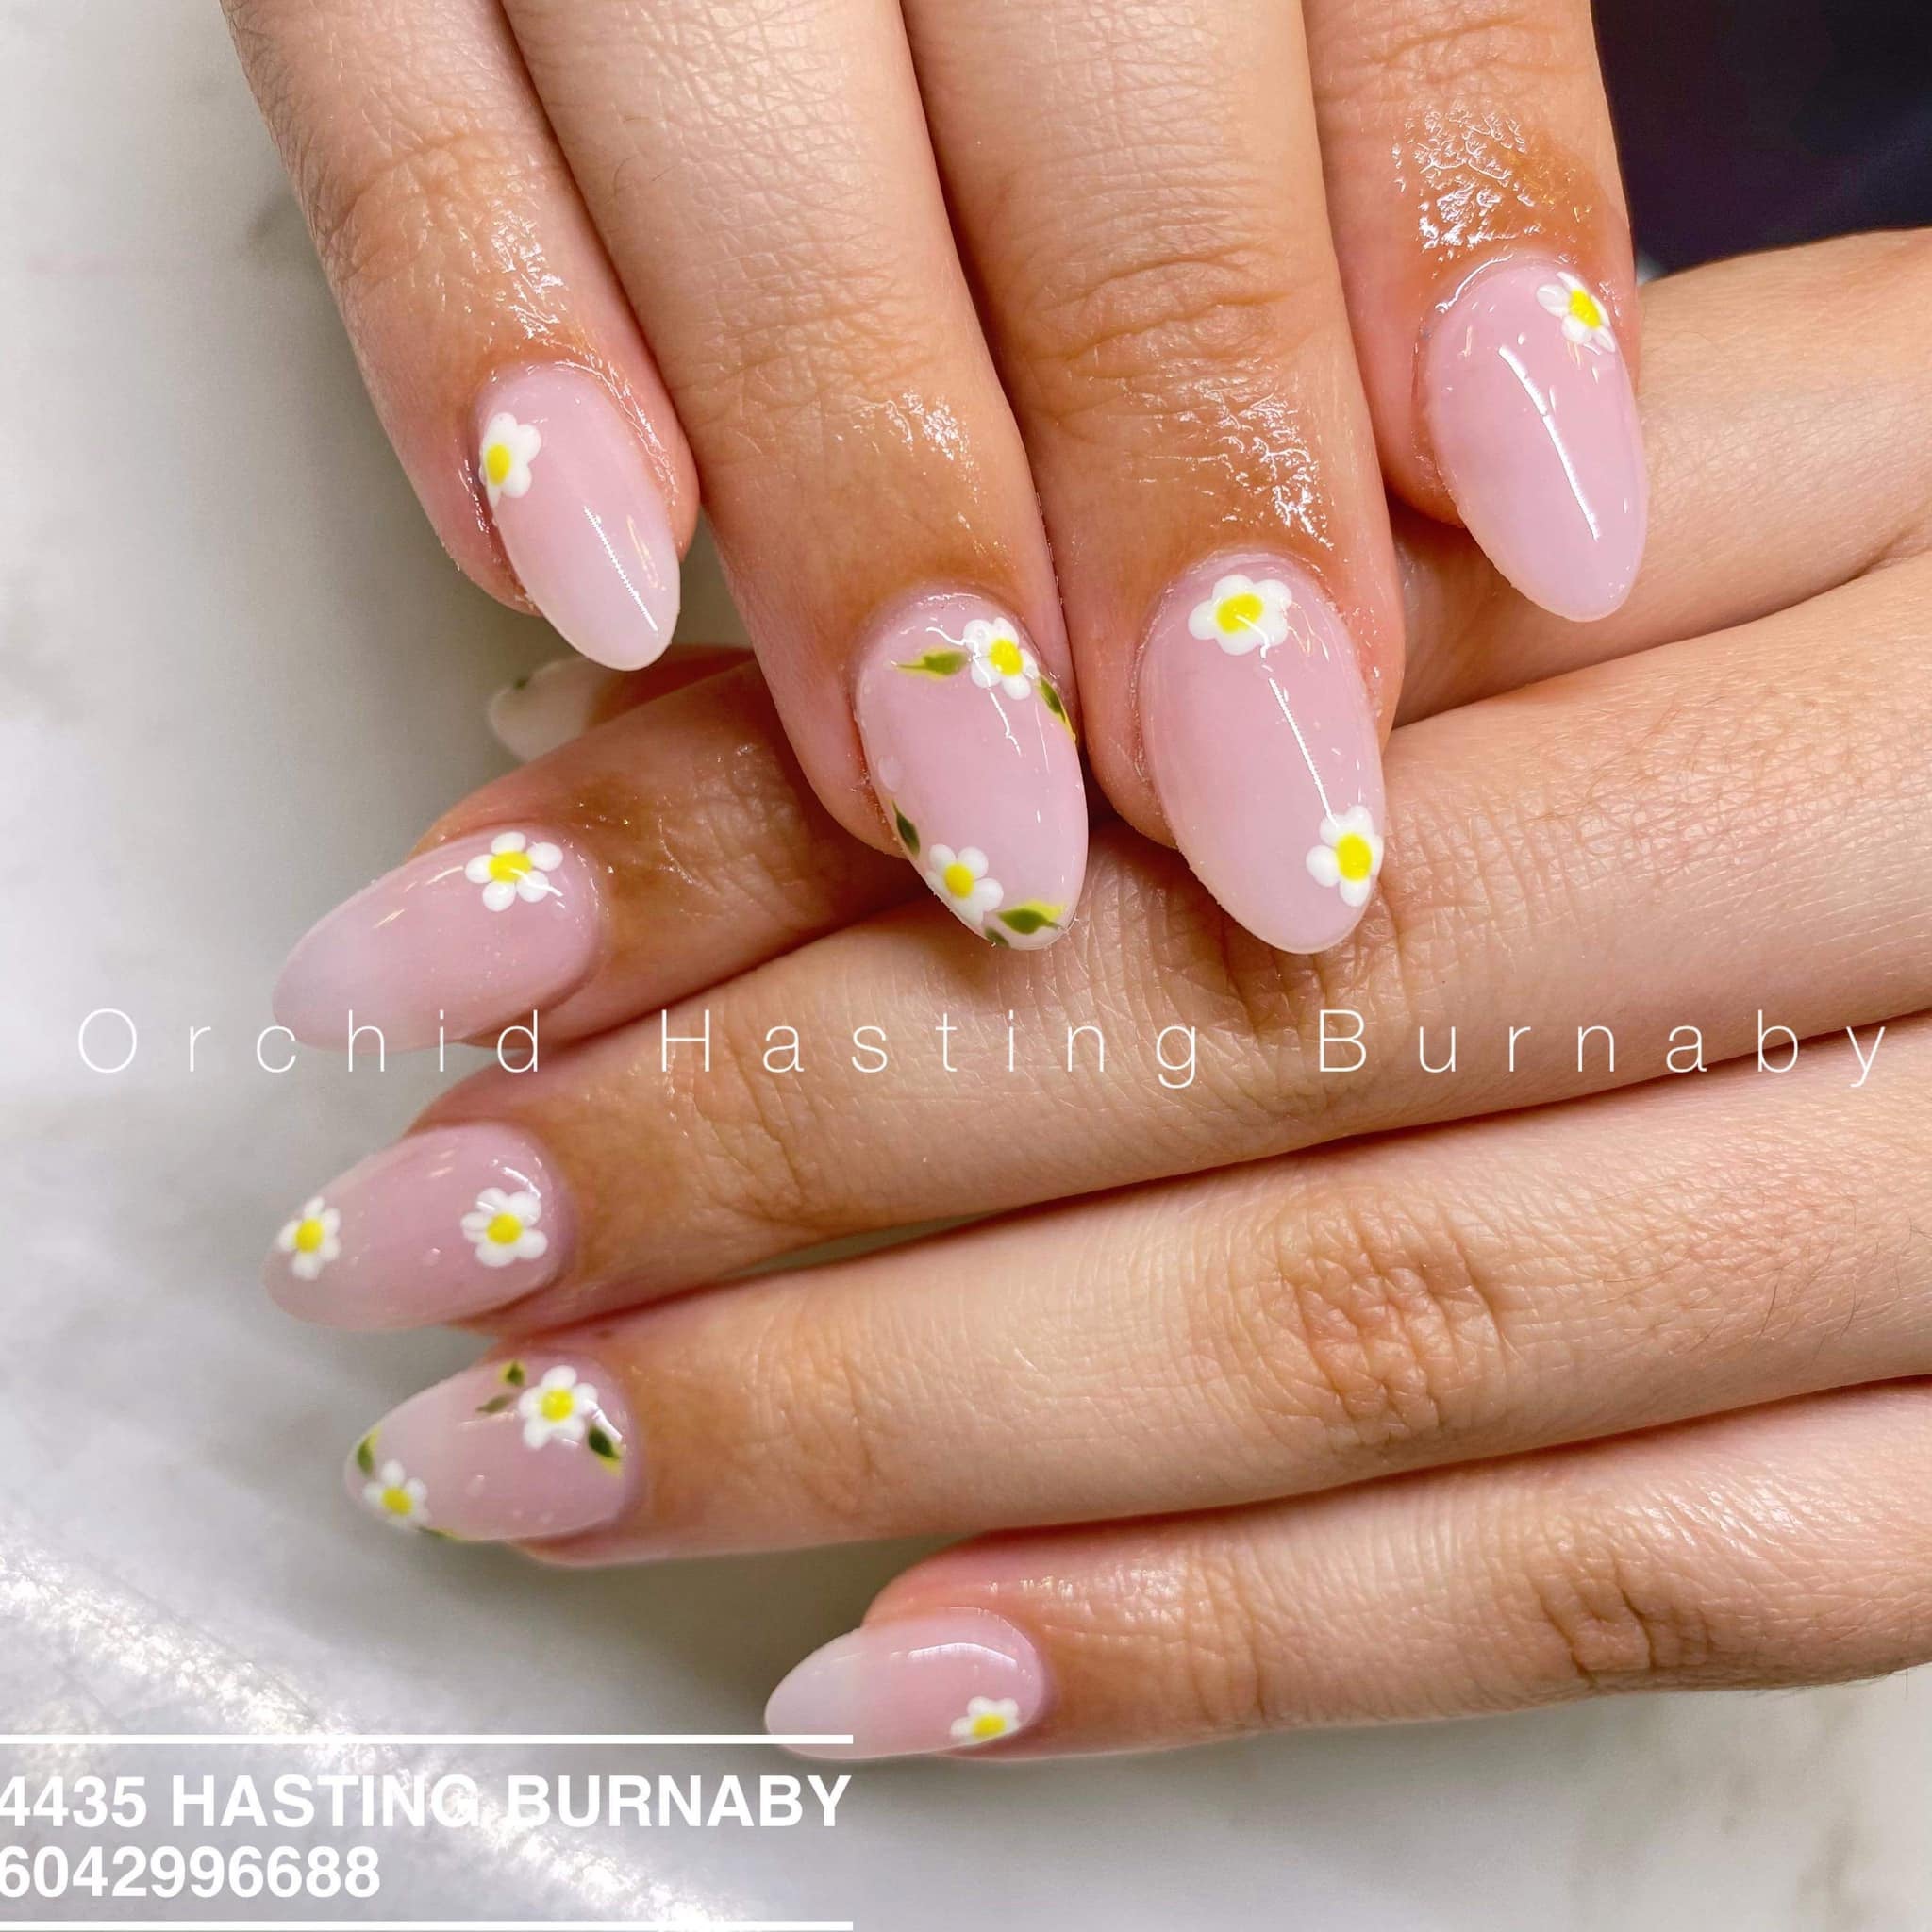 Orchid Hair & Nail Spa: Read Reviews and Book Classes on ClassPass